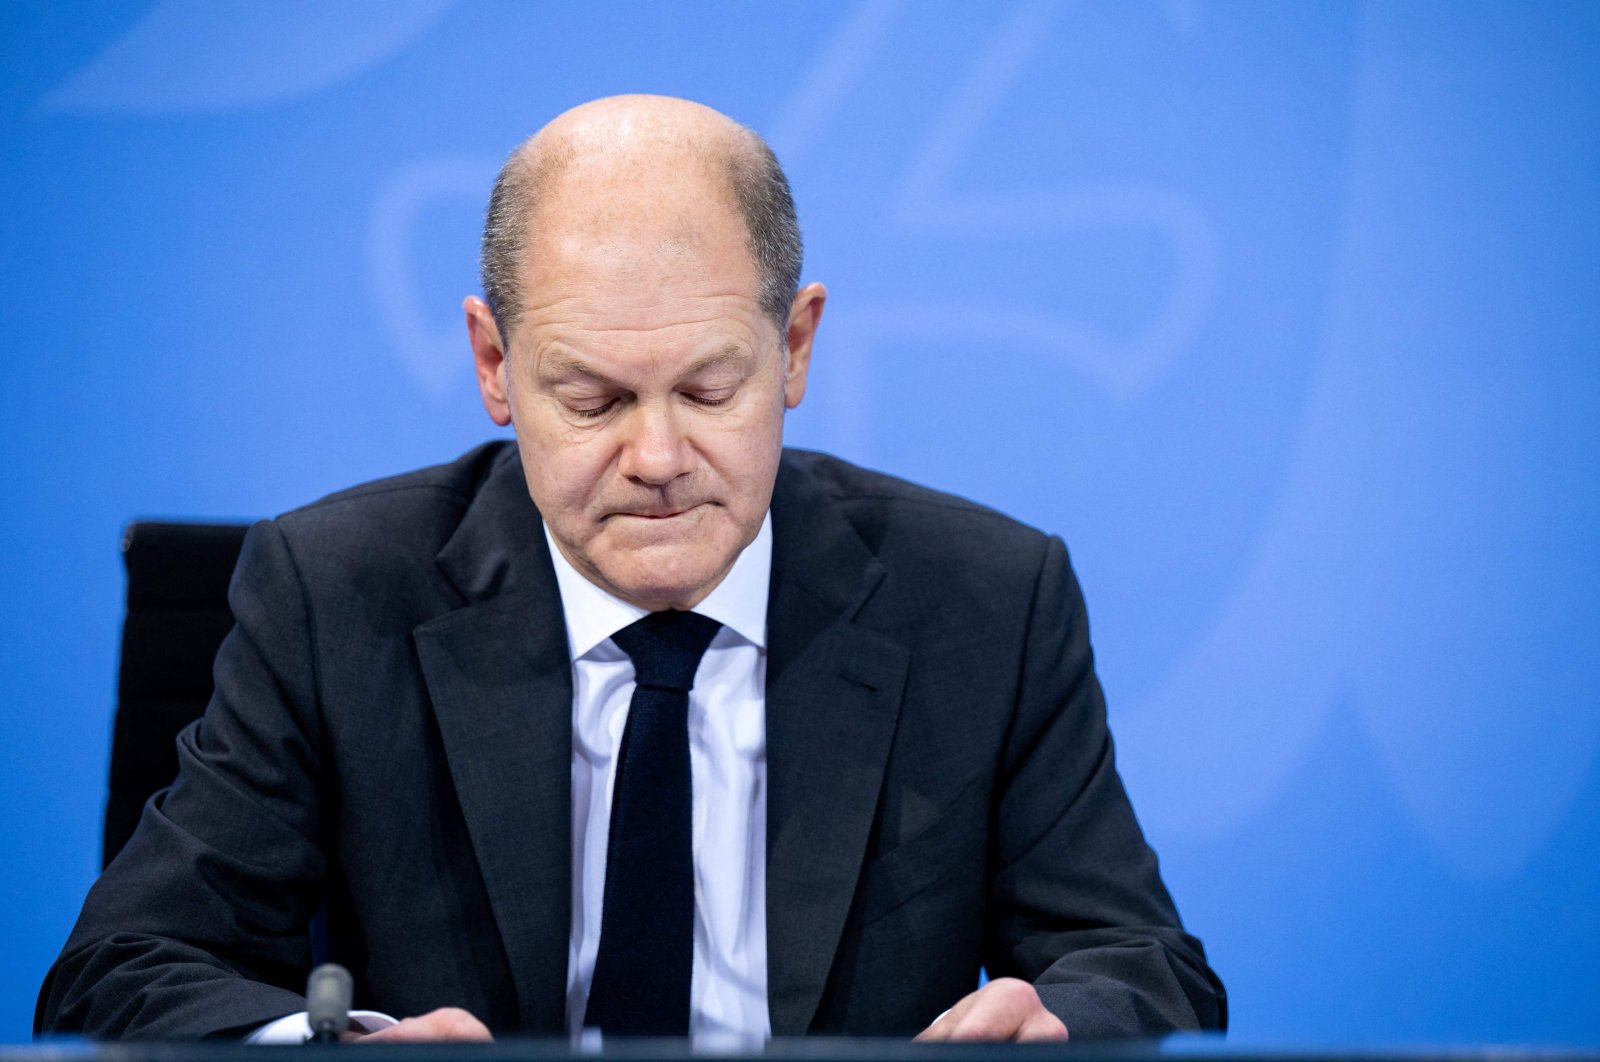 German Chancellor Olaf Scholz looks down as he addresses a press conference following consultations with the premiers of the German federal states on measures to curb the coronavirus pandemic at the Chancellery in Berlin, Germany, Dec. 21, 2021. (Photo via AFP)